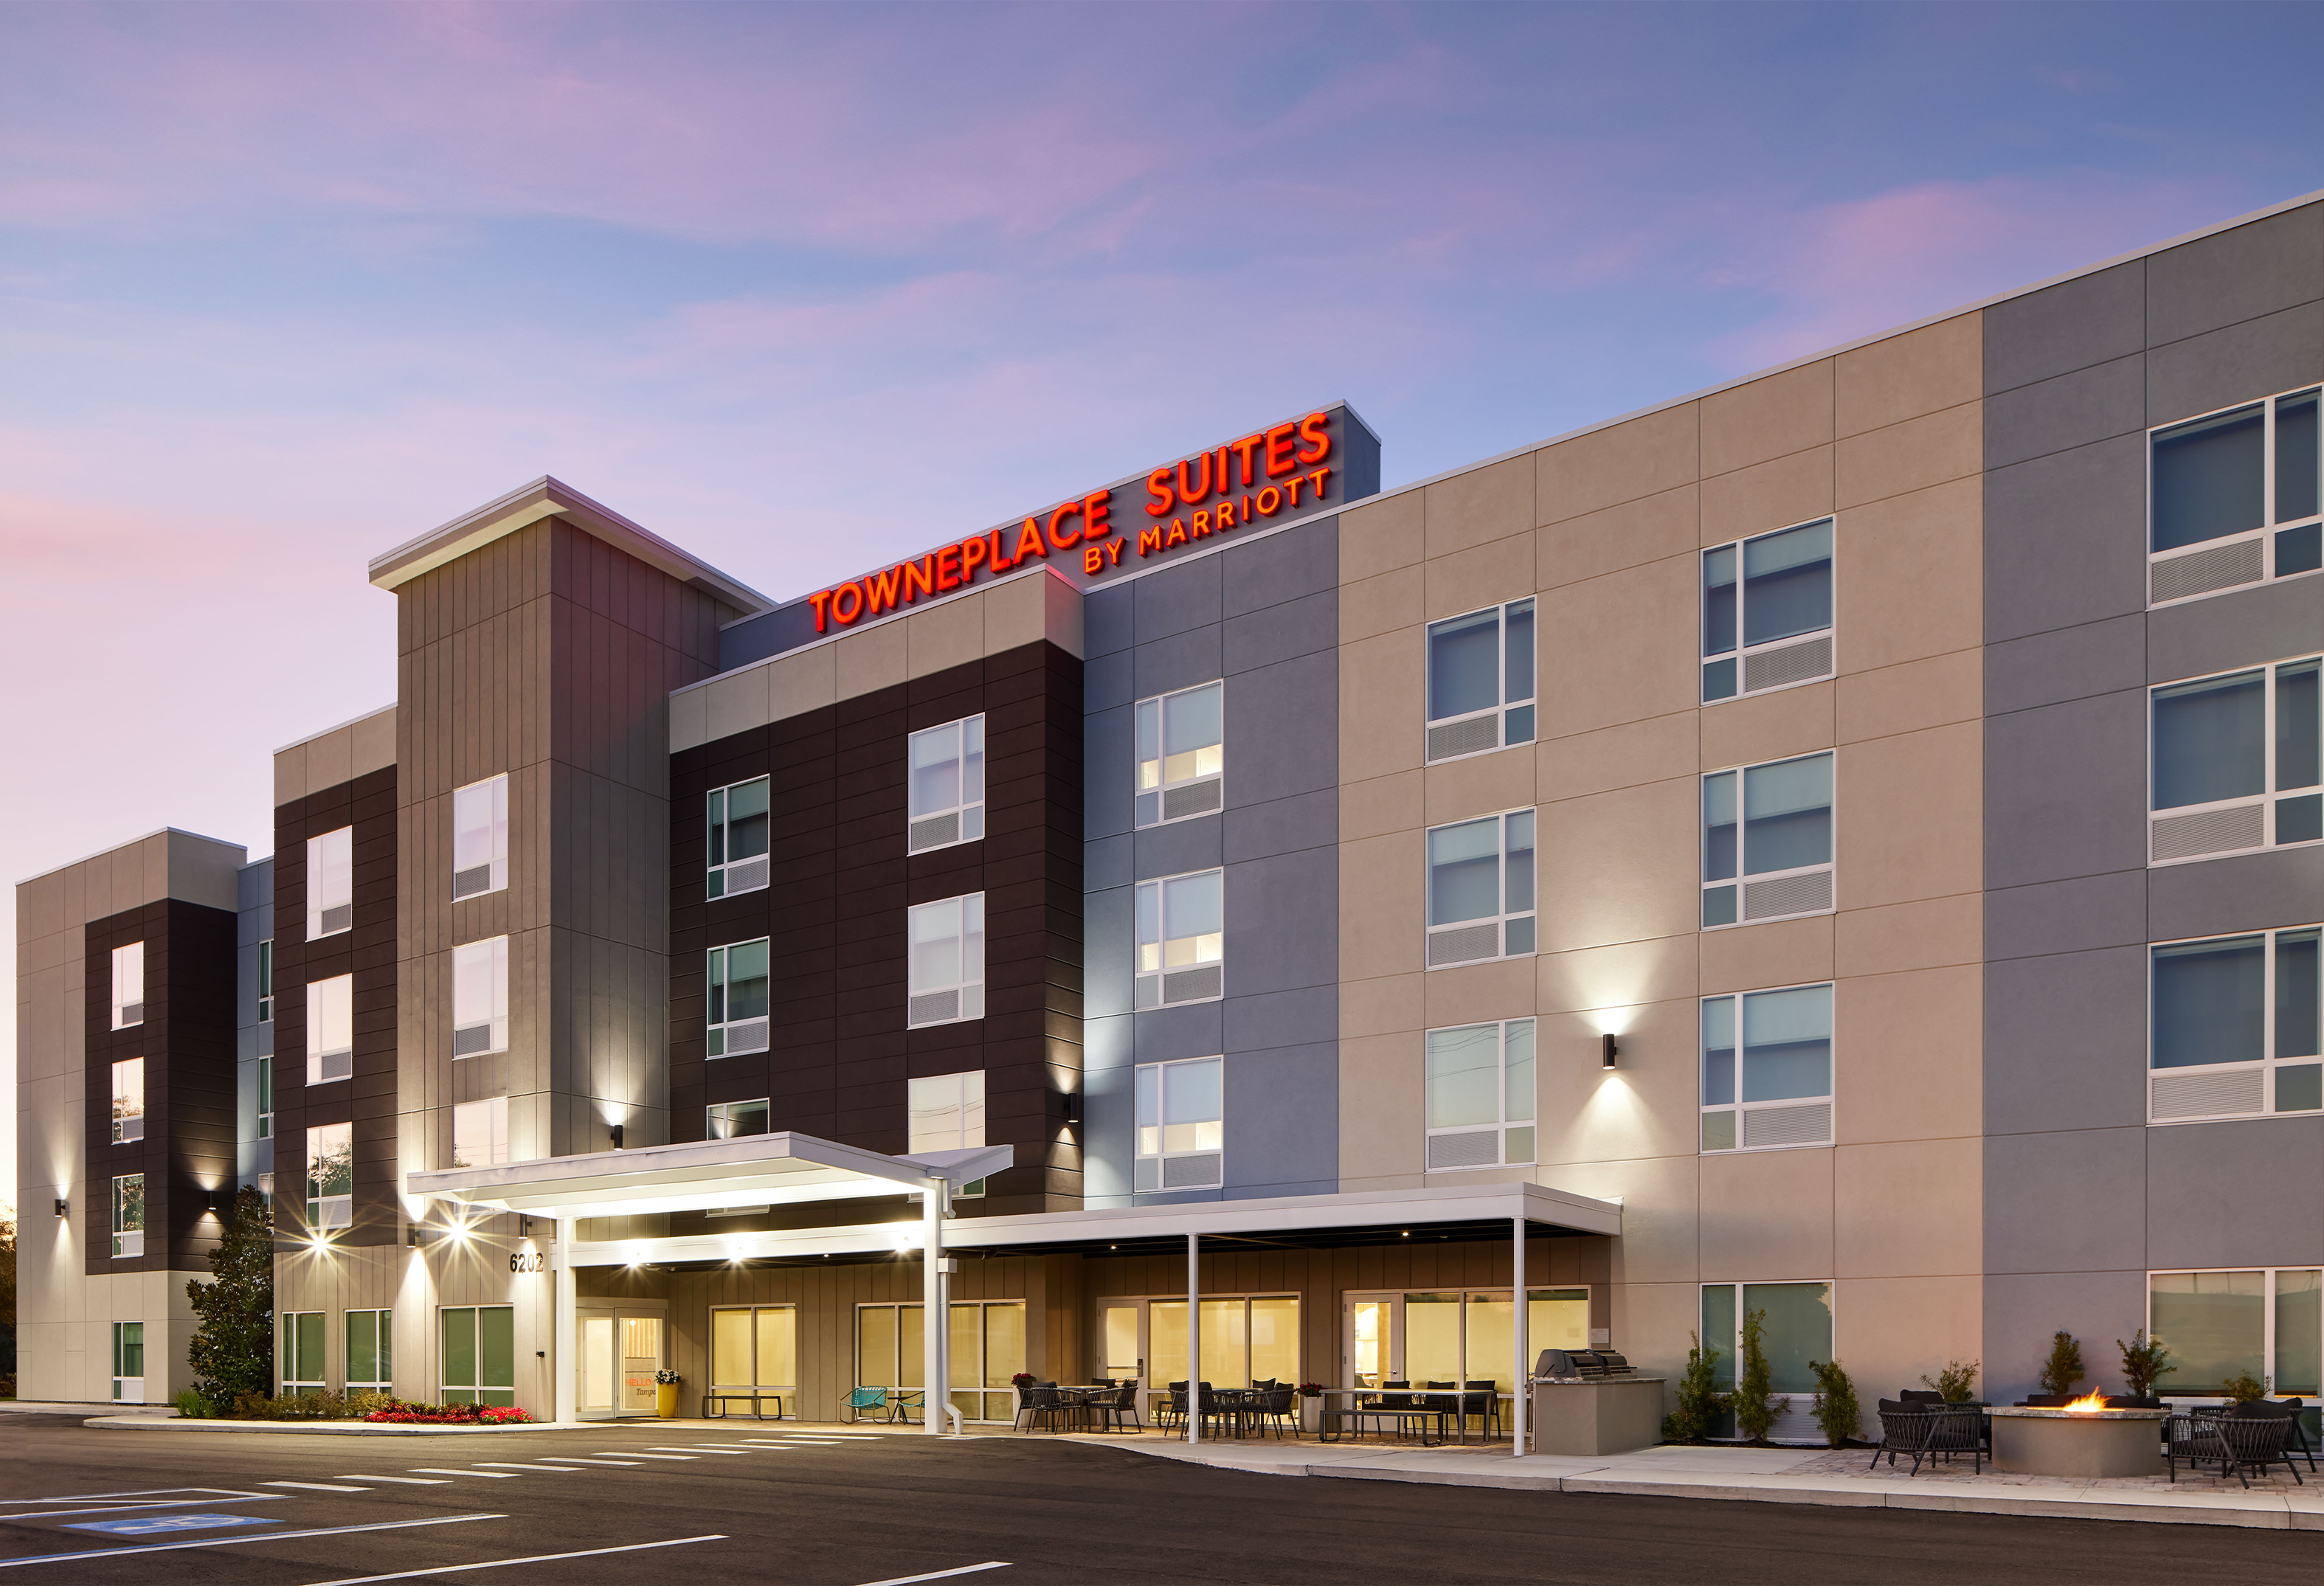 TownePlace Suites by Marriott | Partner Hotel of Seminole Hard Rock Hotel & Casino Tampa